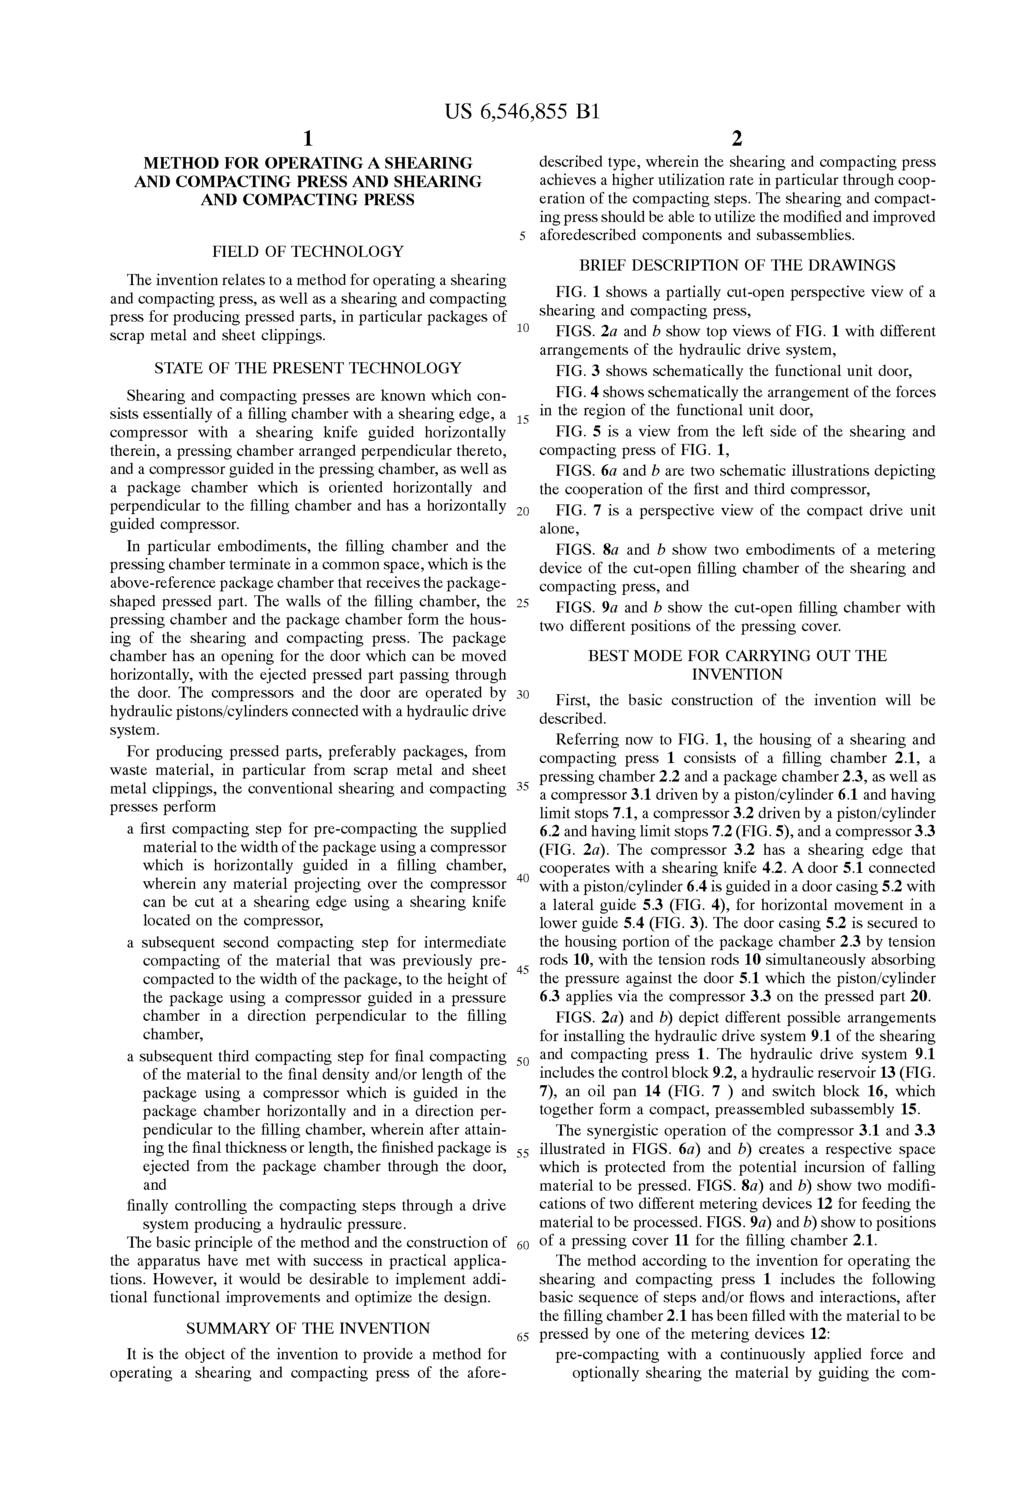 1 METHOD FOR OPERATING ASHEARING AND COMPACTING PRESS AND SHEARING AND COMPACTING PRESS FIELD OF TECHNOLOGY The invention relates to a method for operating a shearing and compacting press, as well as